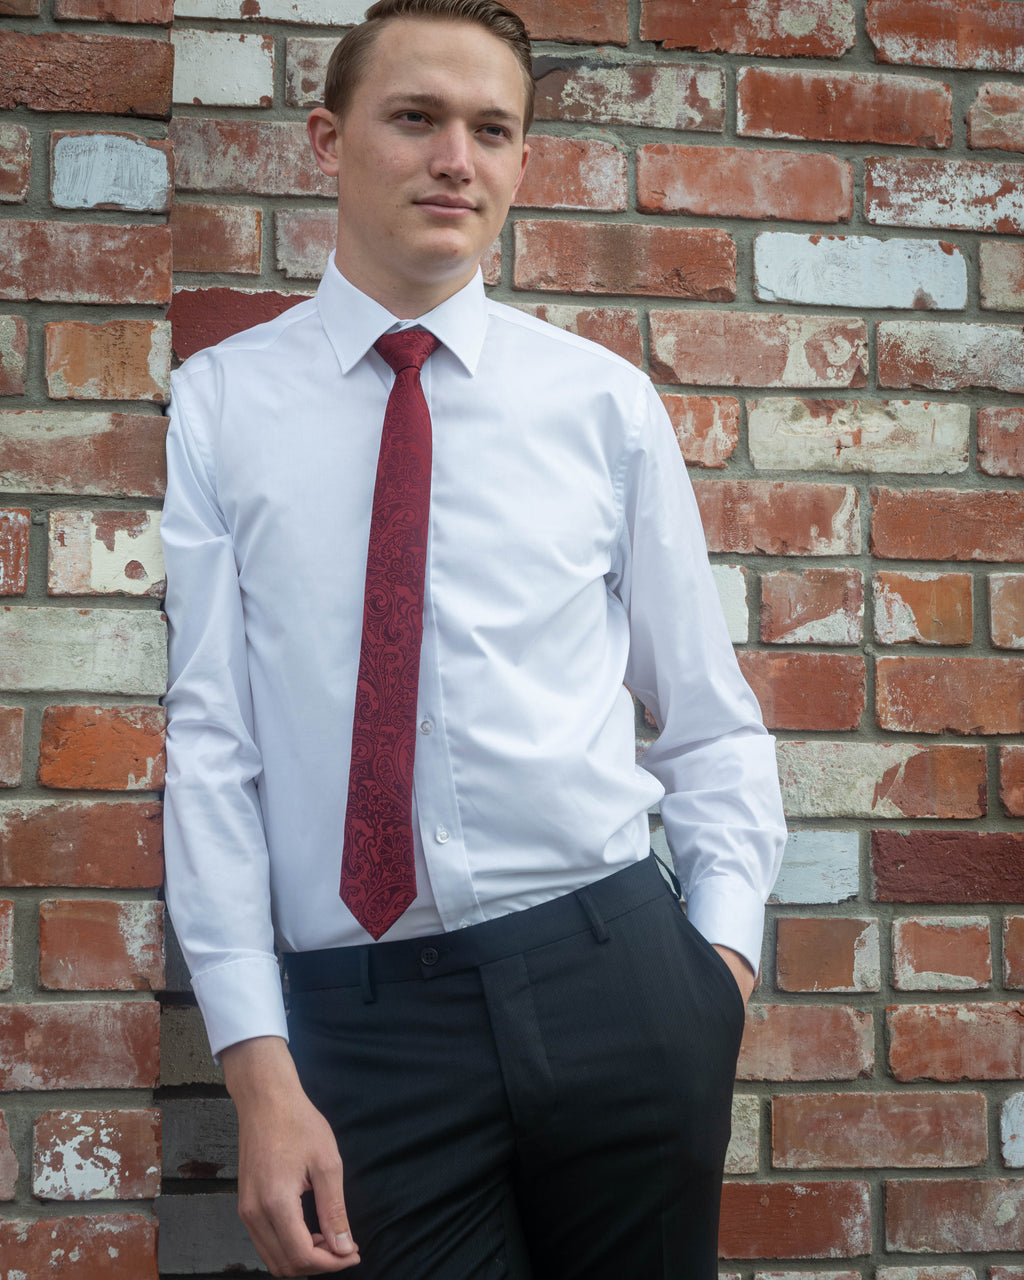 Plain Collar Double French Cuff White Shirt worn with a crimson paisley tie and black trousers